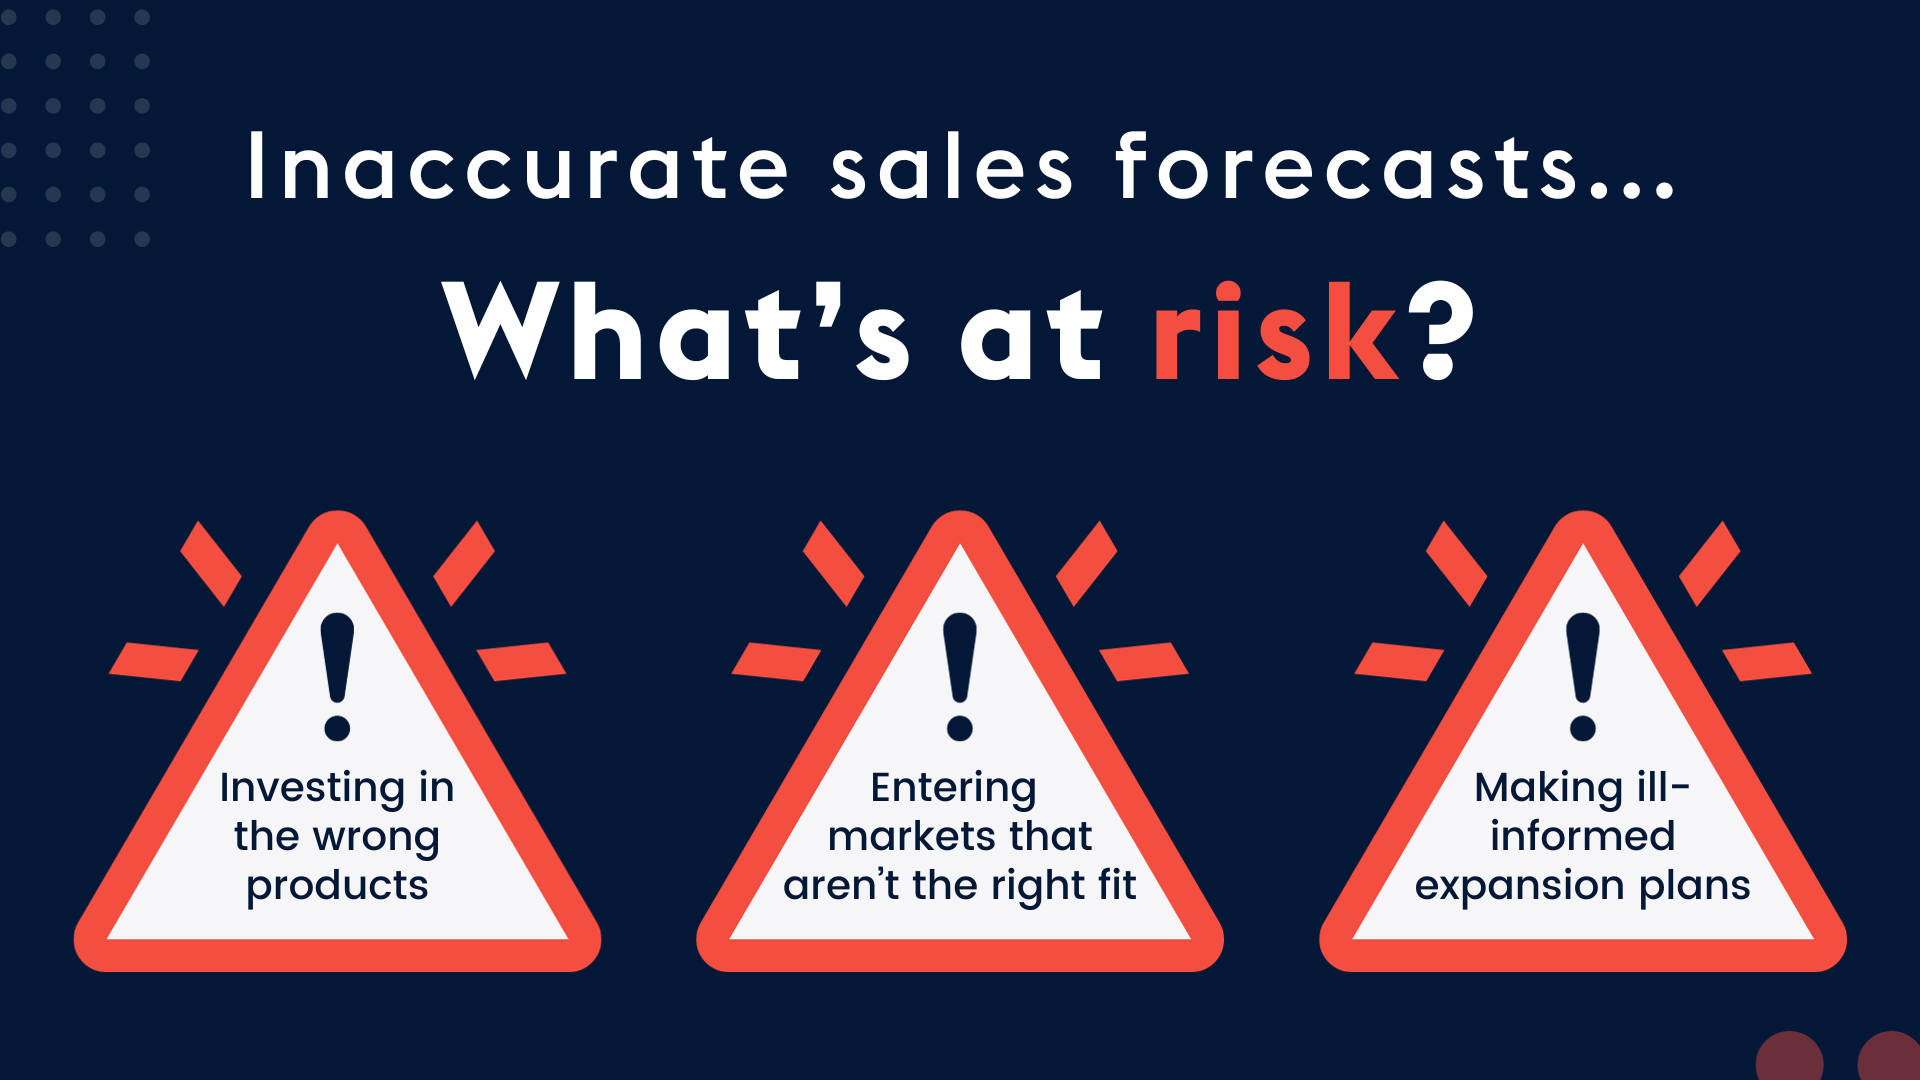 ProvidentCRM-CRM-Inaccurate-Sales-Forecasting-What-Are-Risks-Blog-Graphic